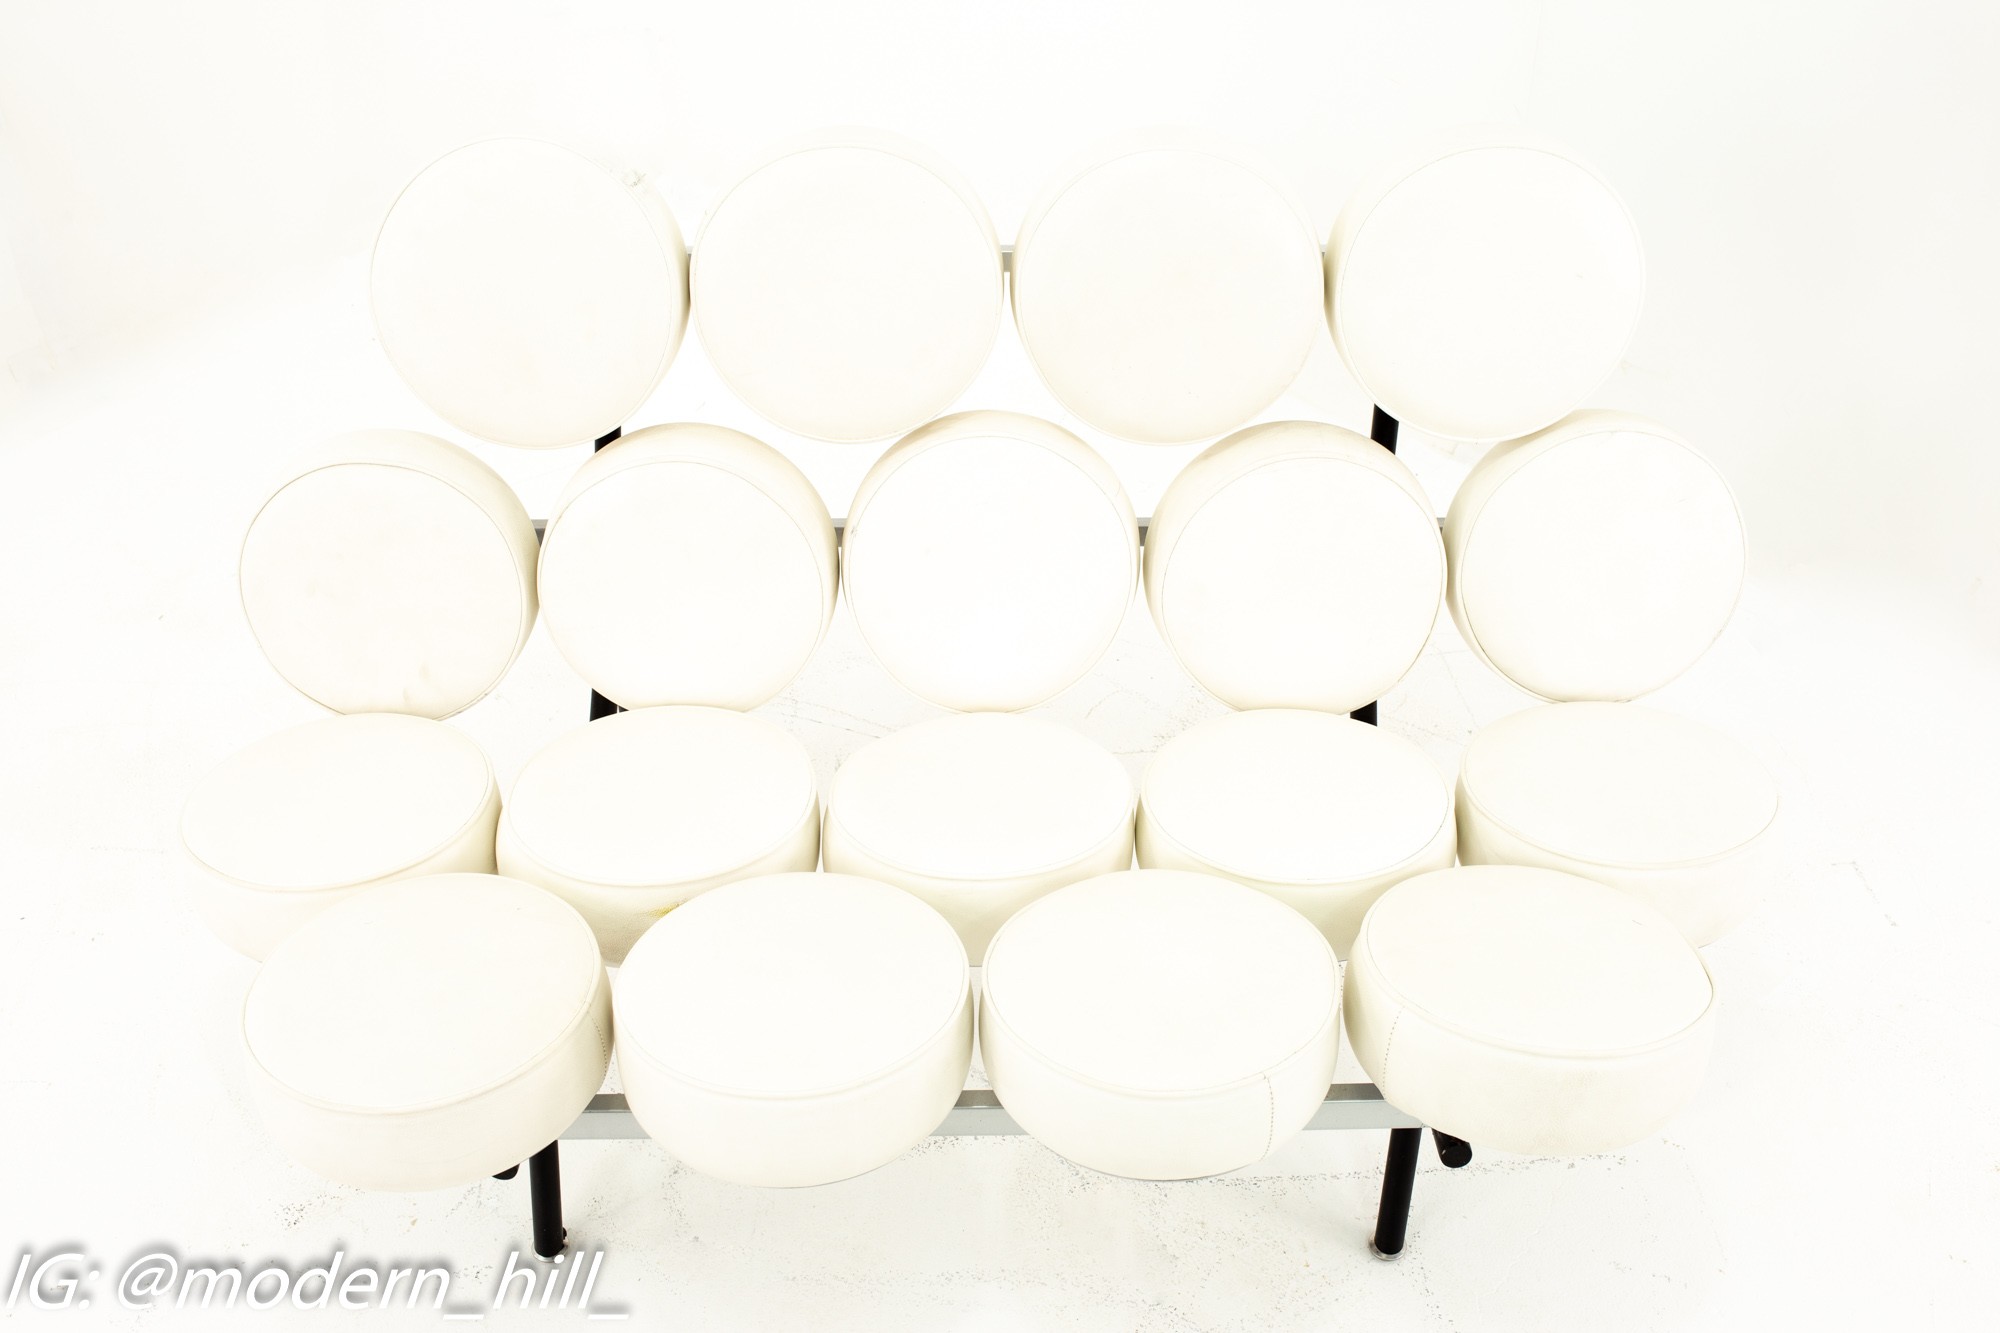 George Nelson for Herman Miller Style Mid Century Marshmallow Sofa White